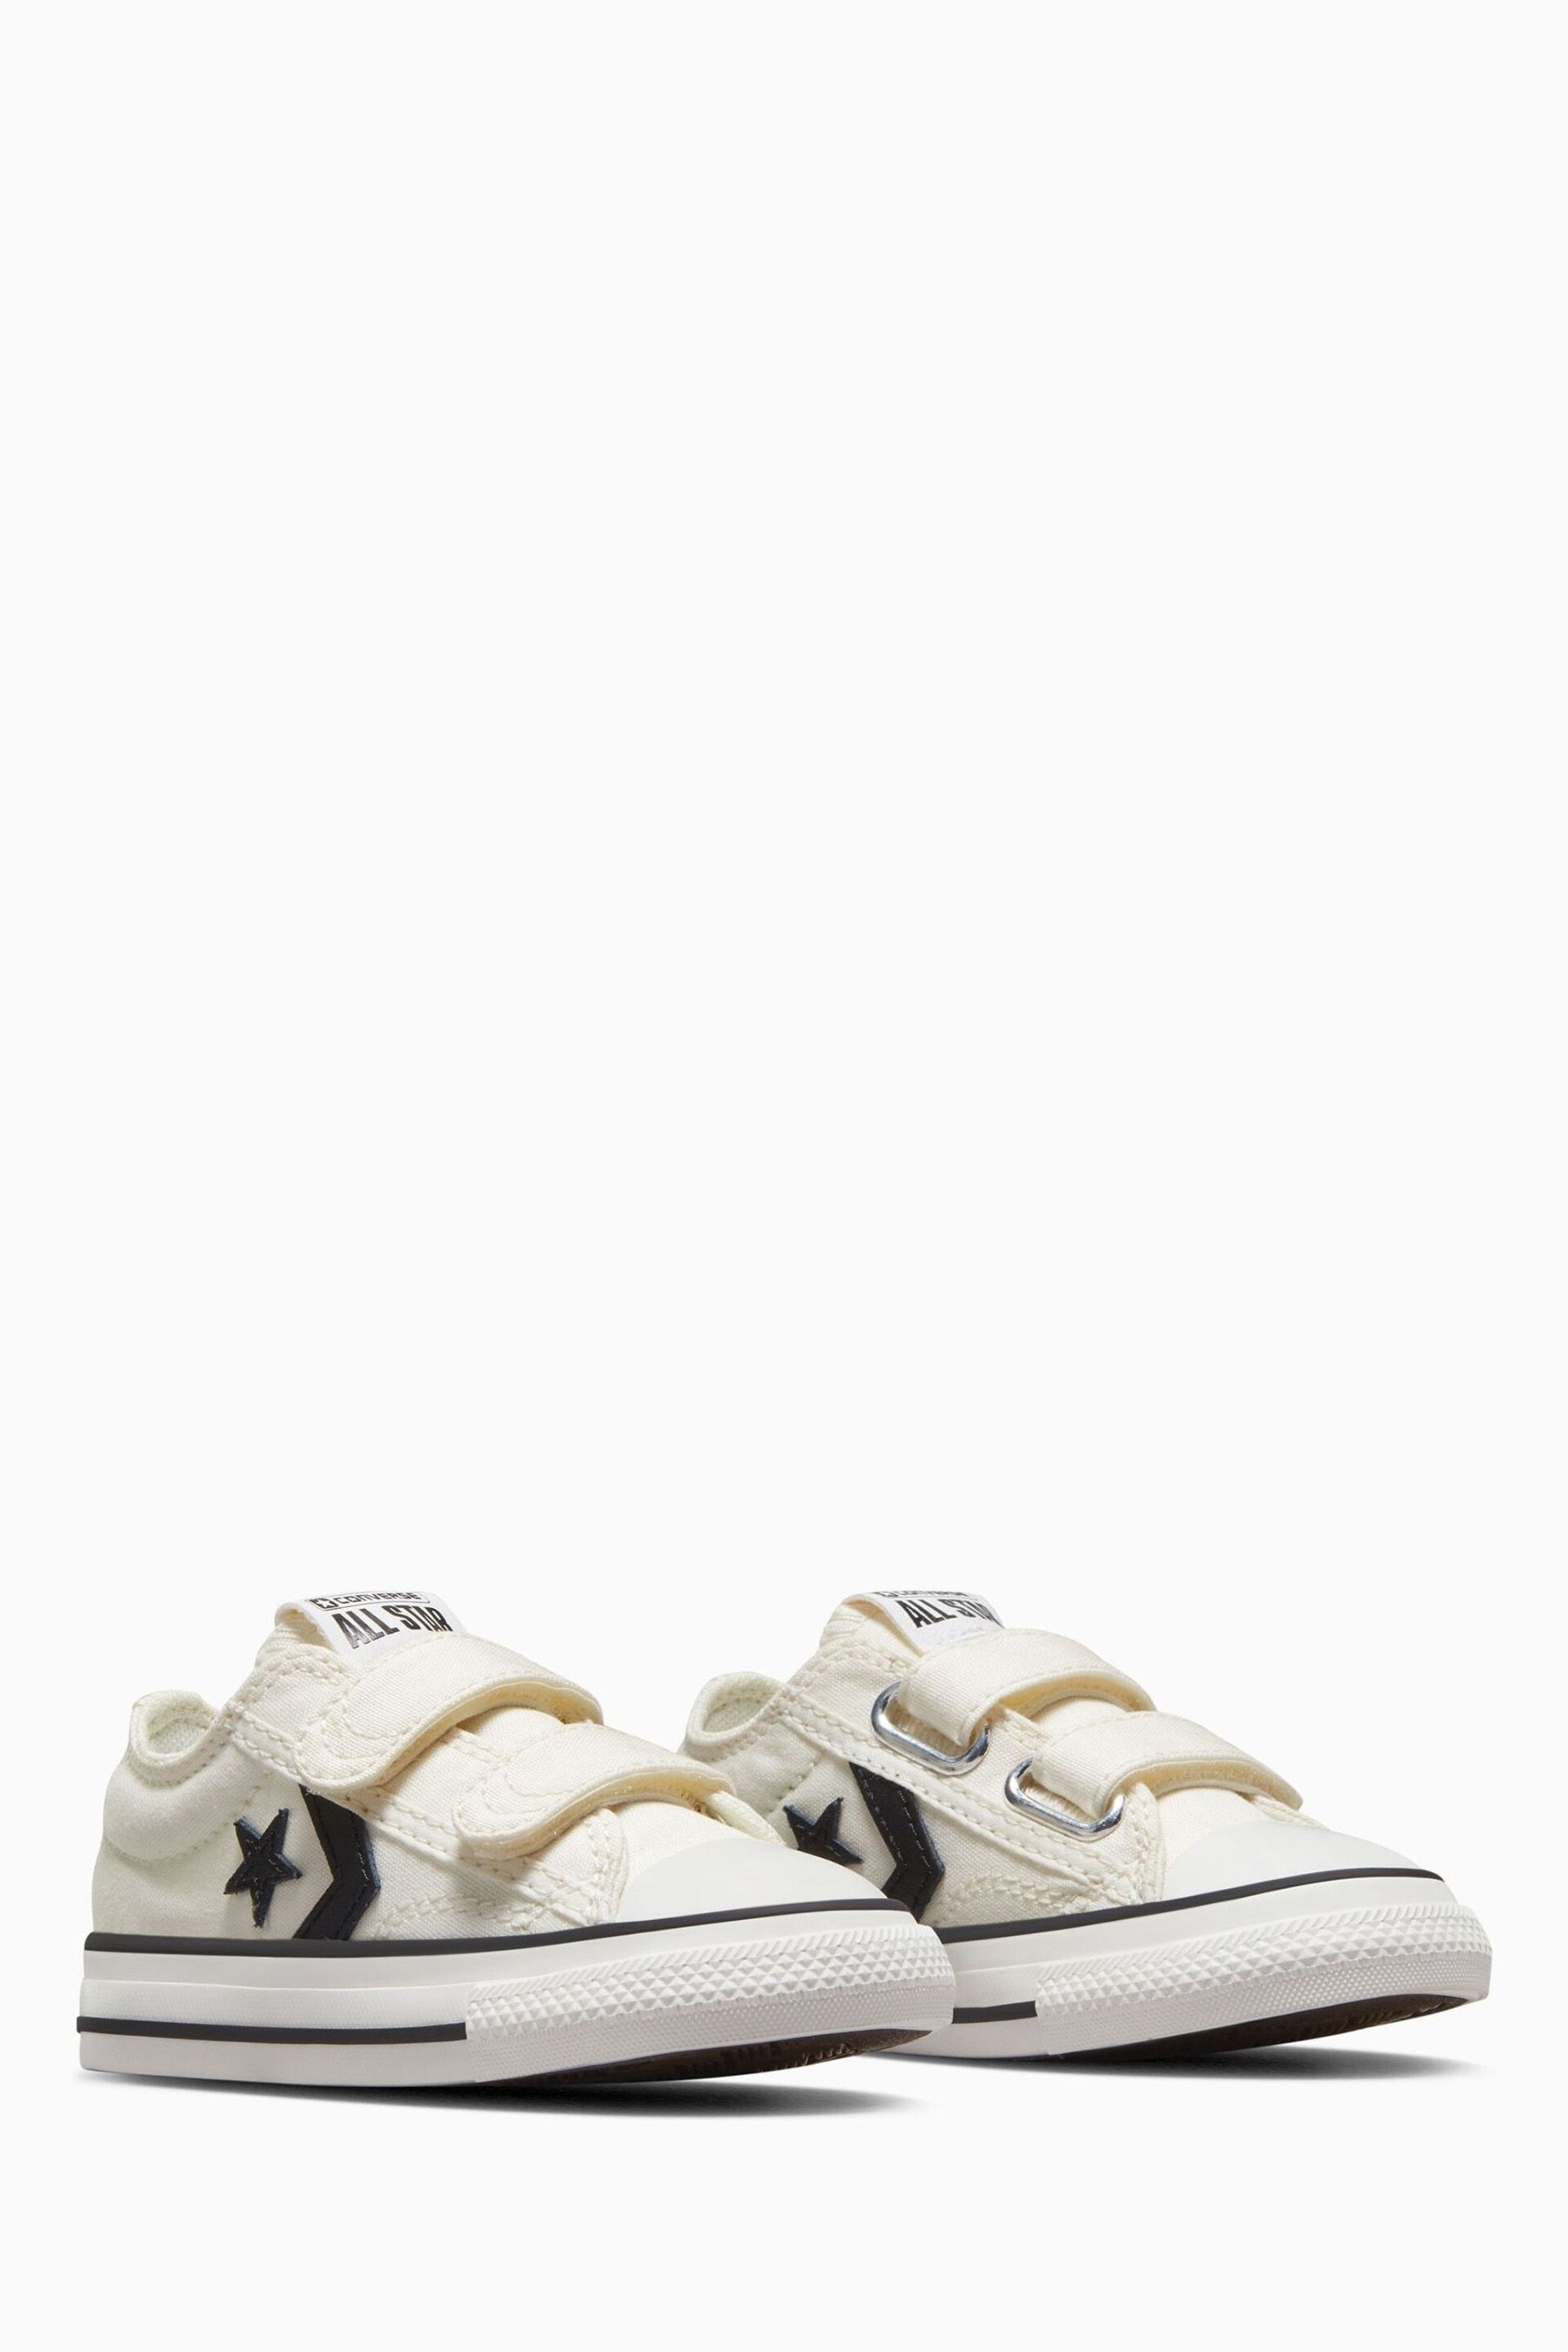 Converse White Infant Star Player 76 2V Easy On Trainers - Image 3 of 9